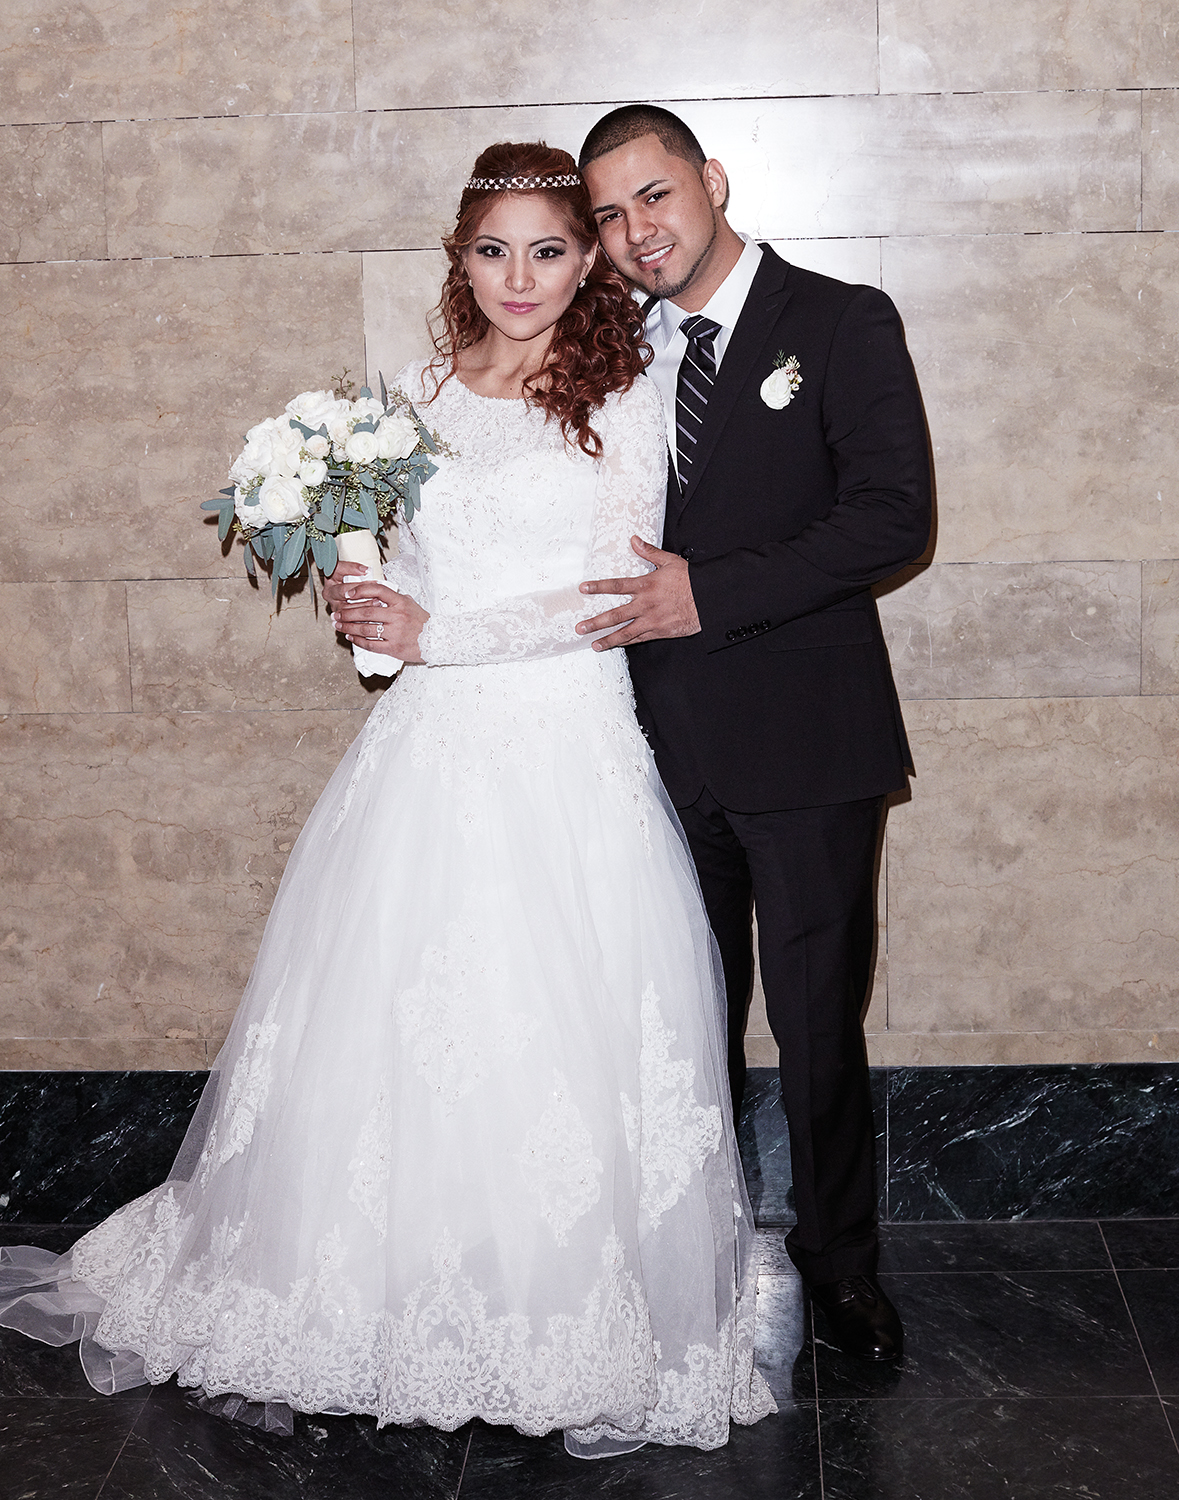  Jessy and Renzo, just married at the City Clerk's Office, Manhattan Feb. 12th, 2016, Yahoo Style Feature Feb 2016 